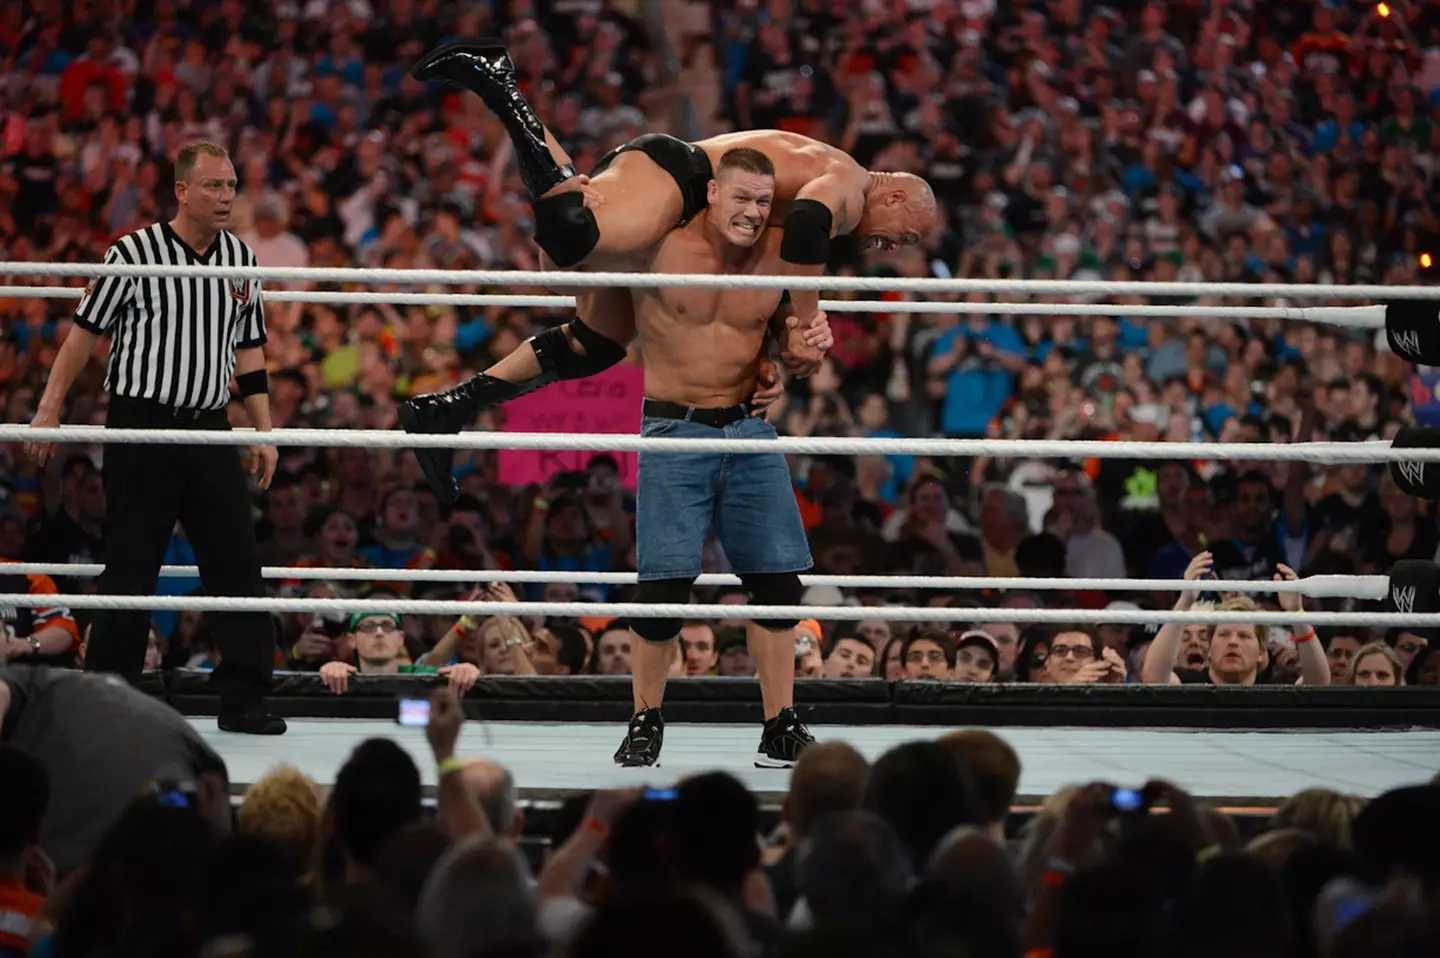 John Cena and The Rock in action in the WrestleManiaXXVIII in 2012.